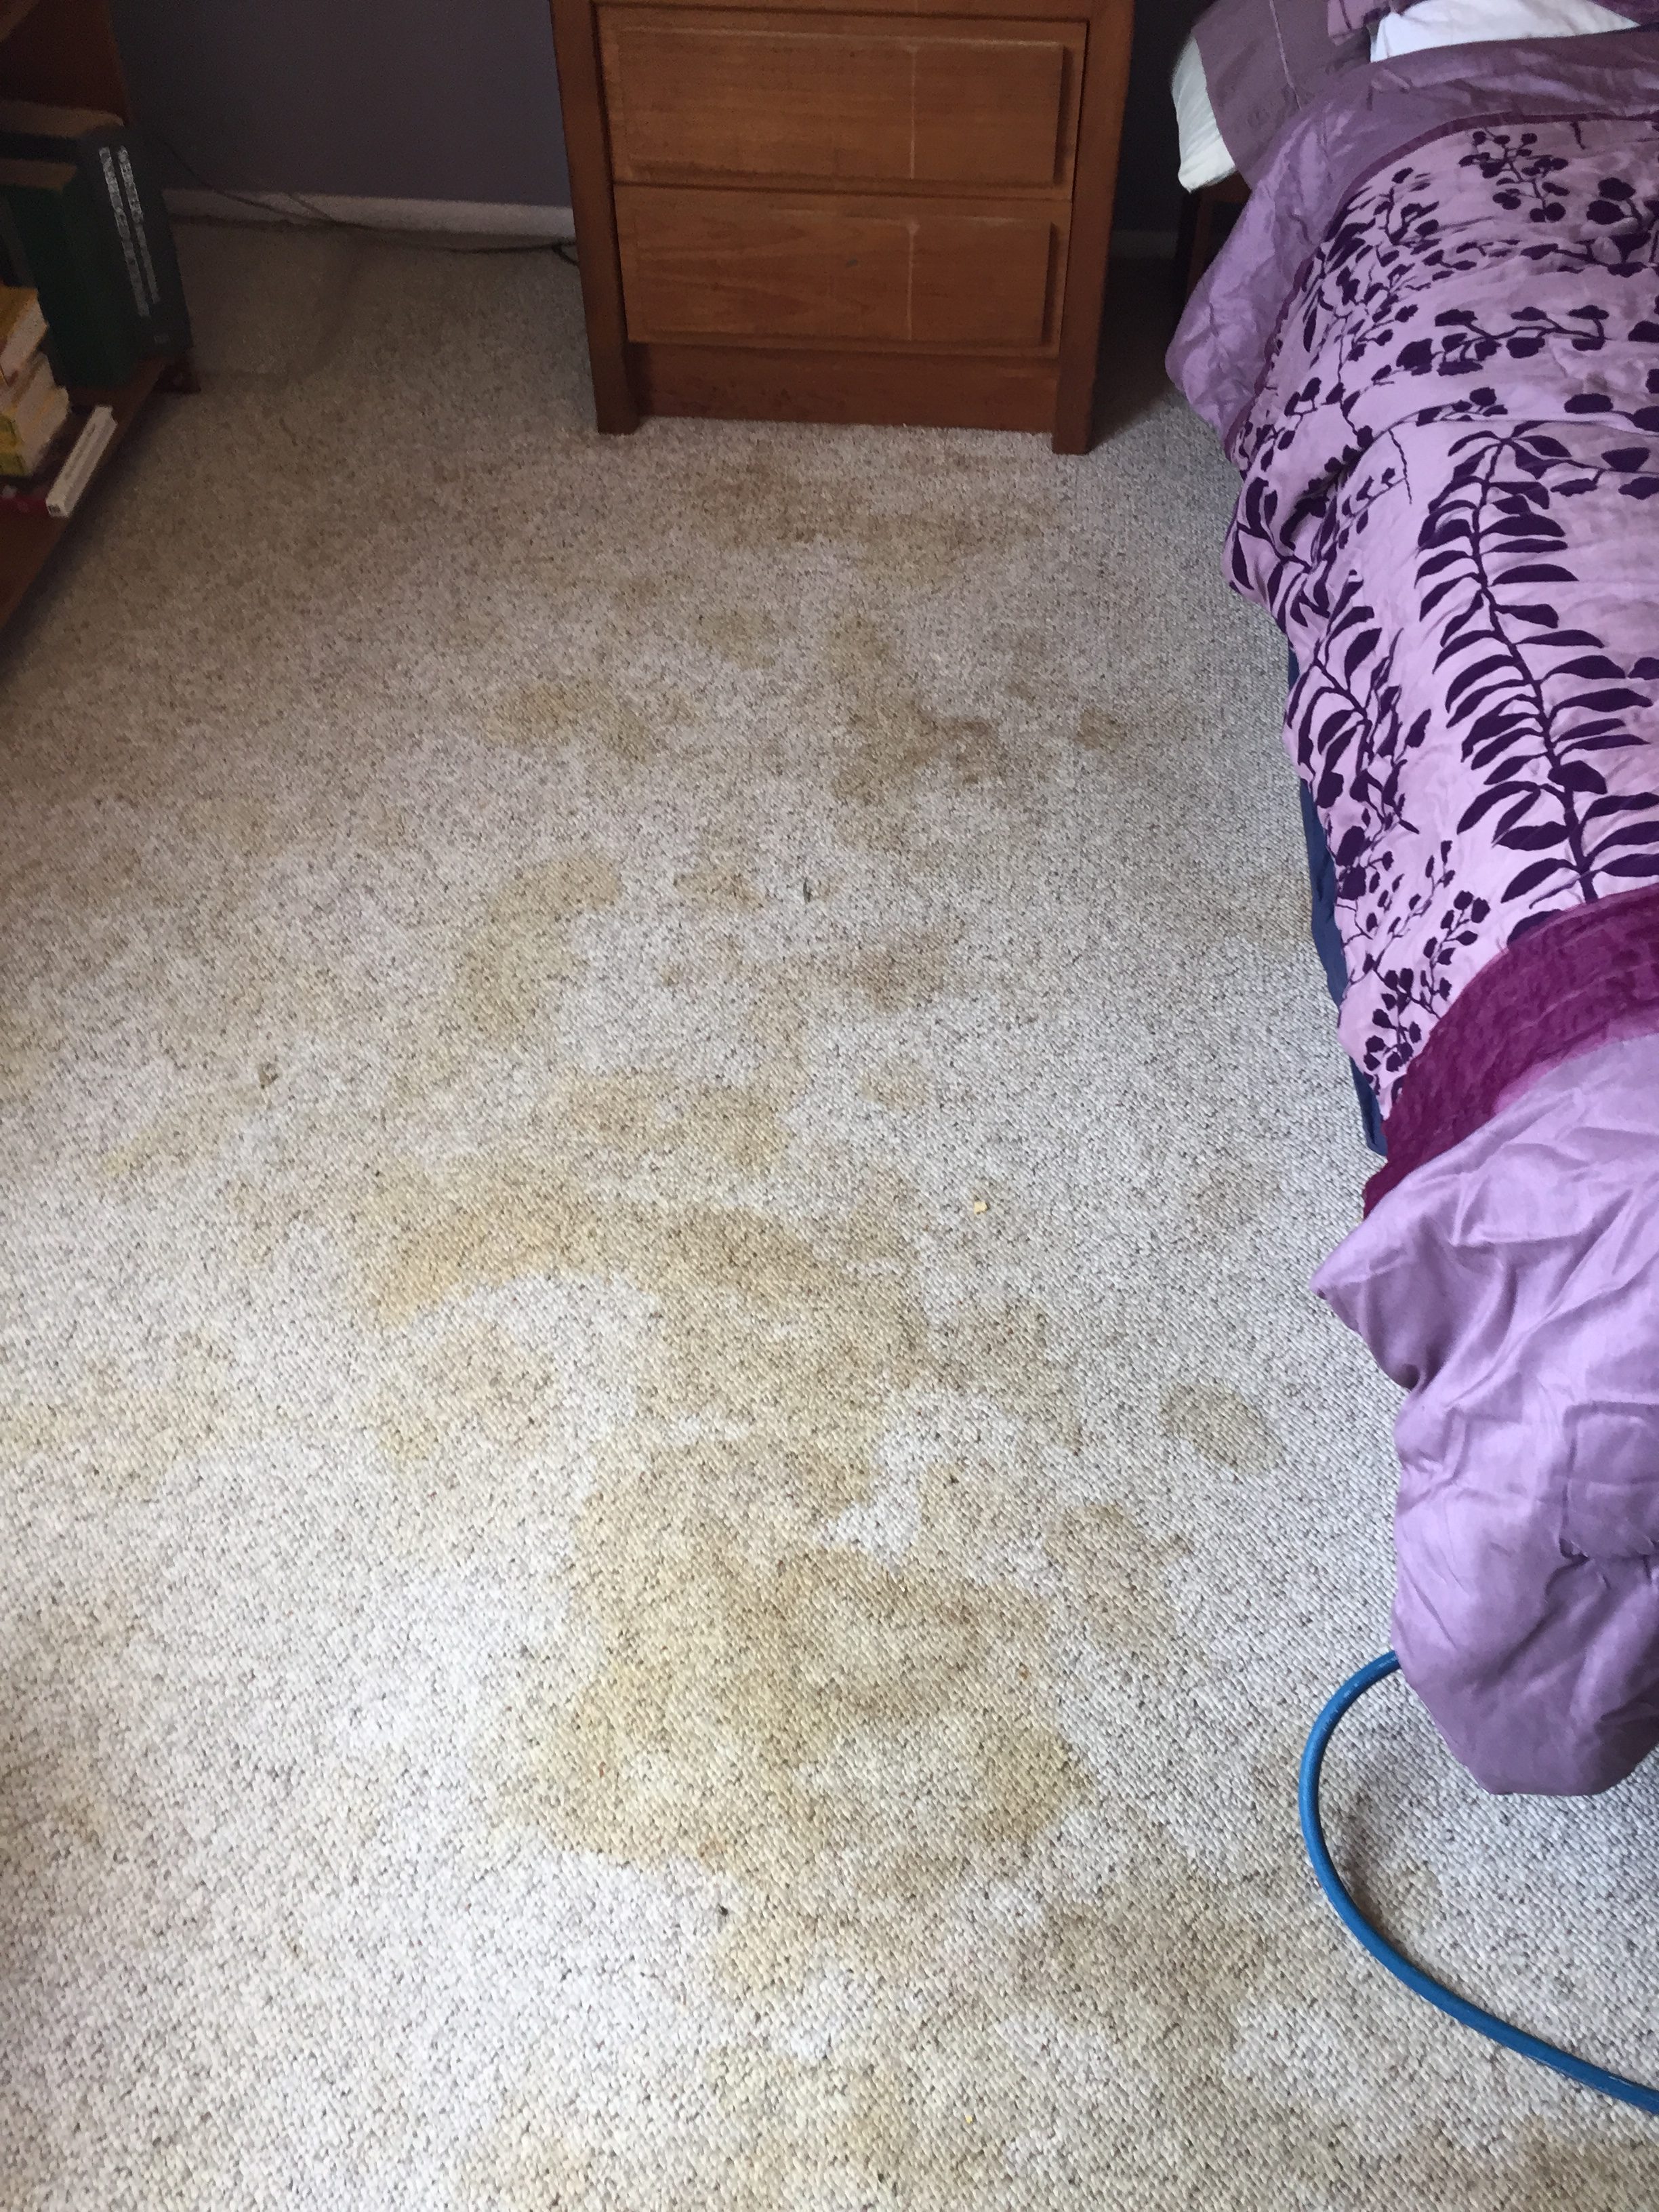 Carpet Cleaning – Before